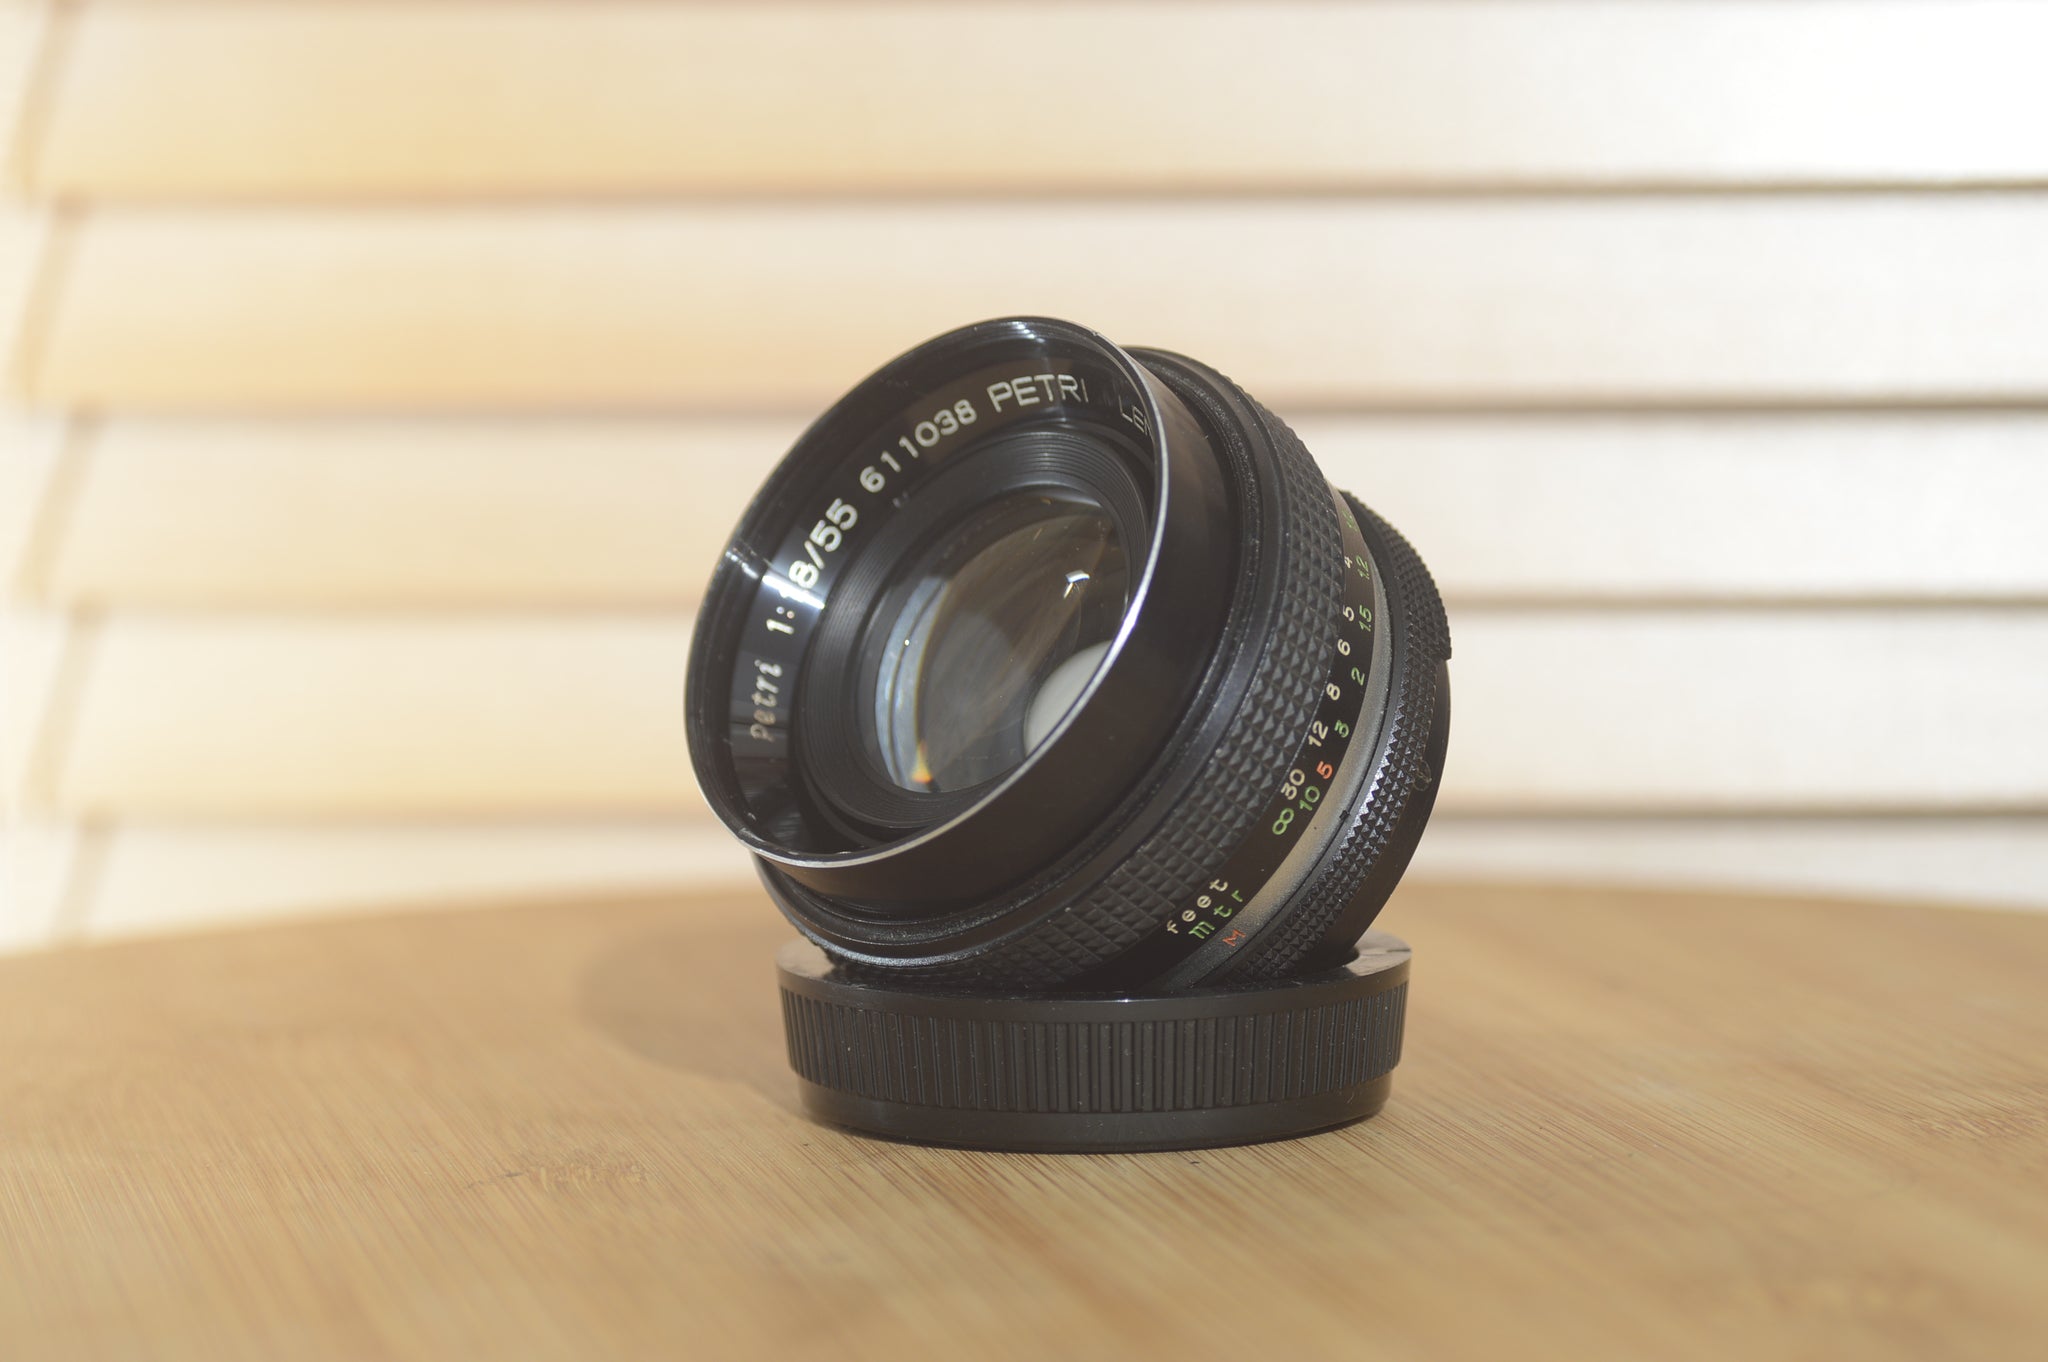 Petri 55mm f1.8 M42 Lens. Perfect for full frame conversation or vintage M42 SLR - RewindCameras quality vintage cameras, fully tested and serviced